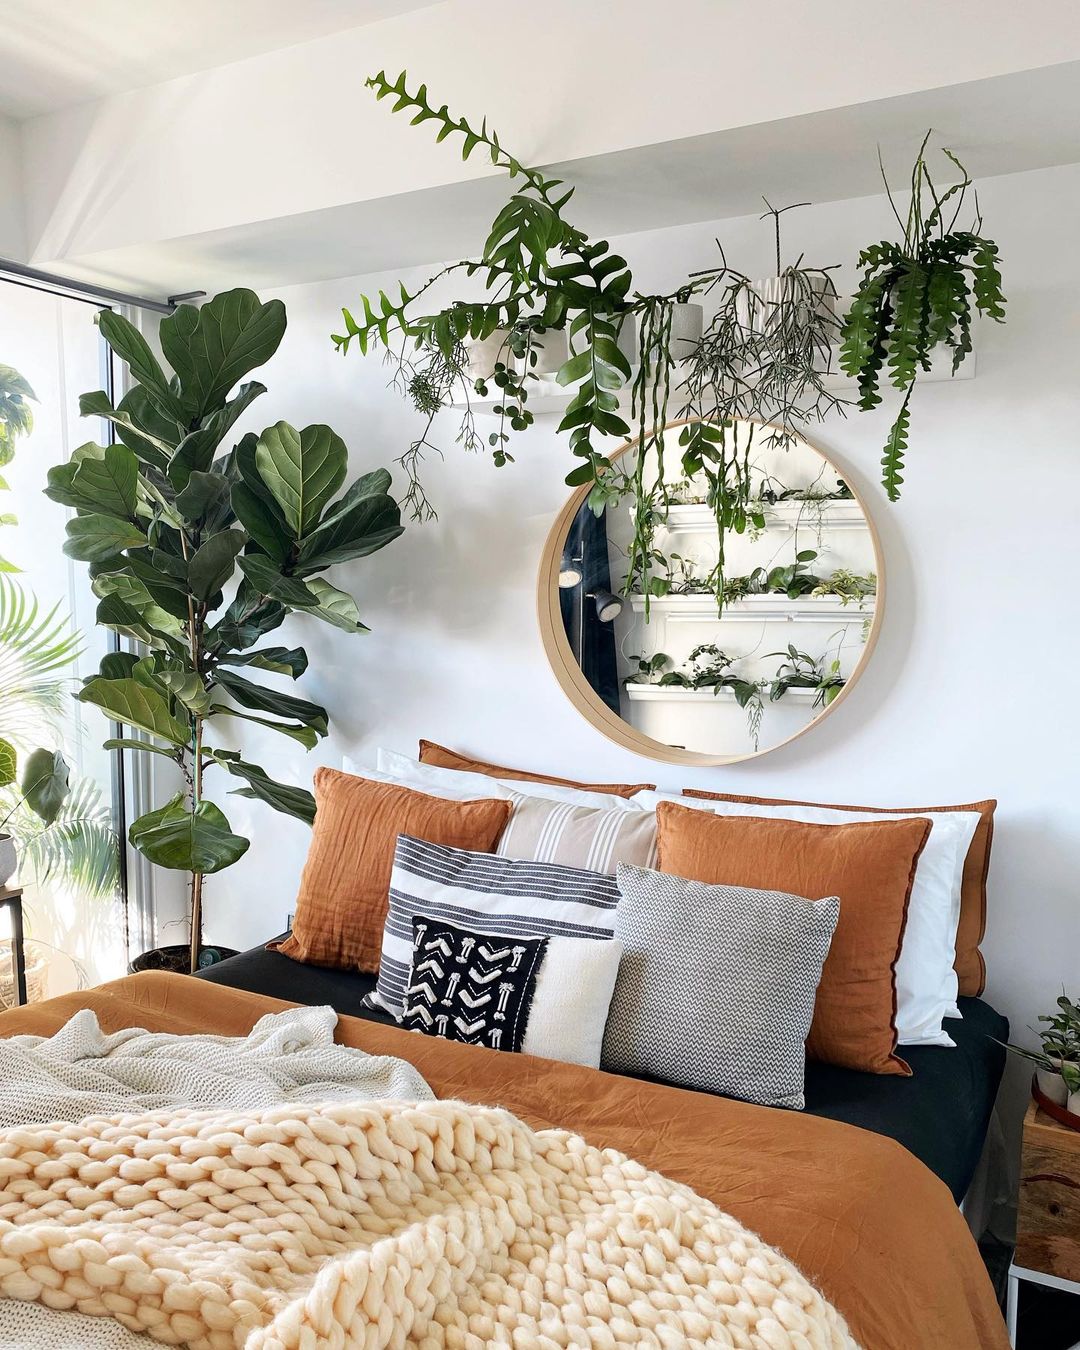 Bedroom photo featuring several plants, including a fiddle-leaf fig and several trailing plants. Photo by Instagram user @dorringtonr.